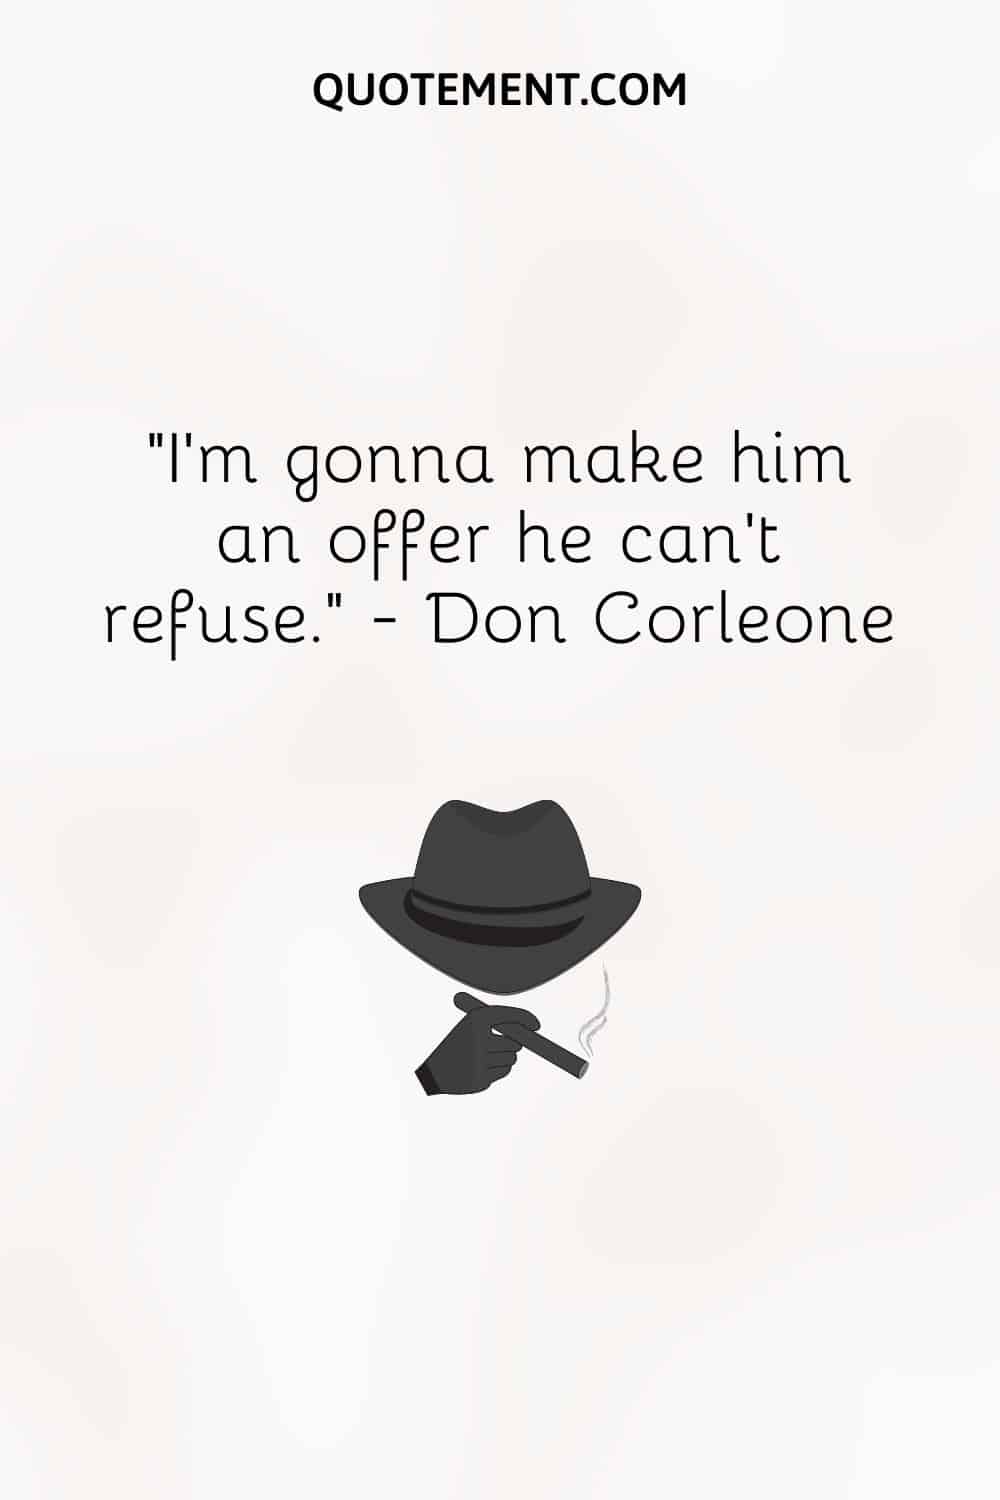 illustration of a man with a hat representing gangster quote